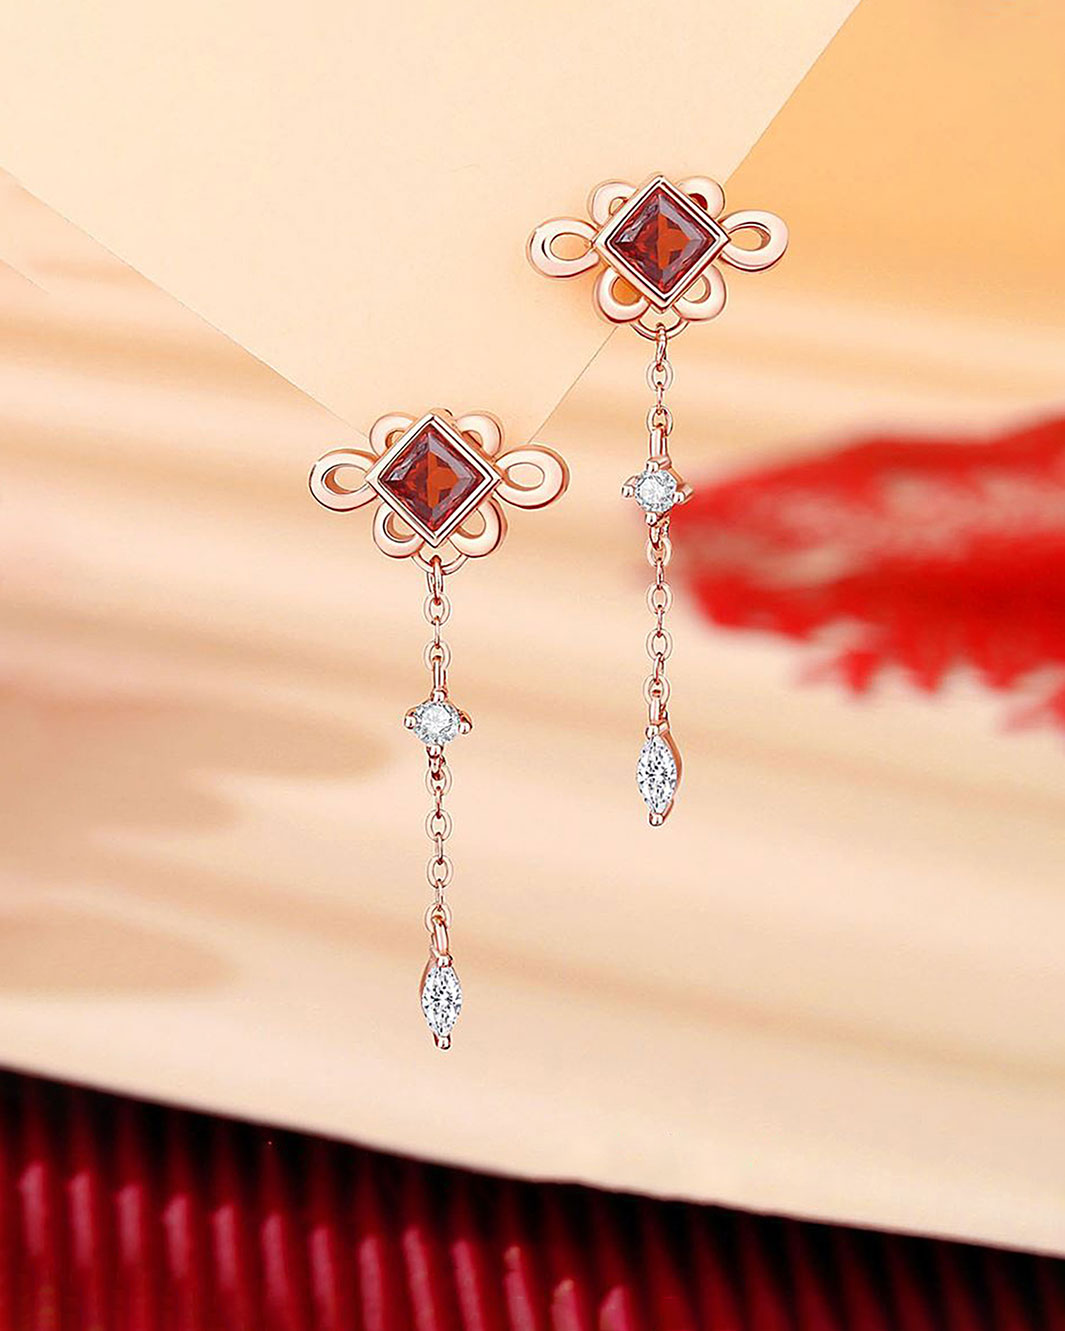 Chinese Knot Blessing Drop Earrings / 平安结流苏耳钉